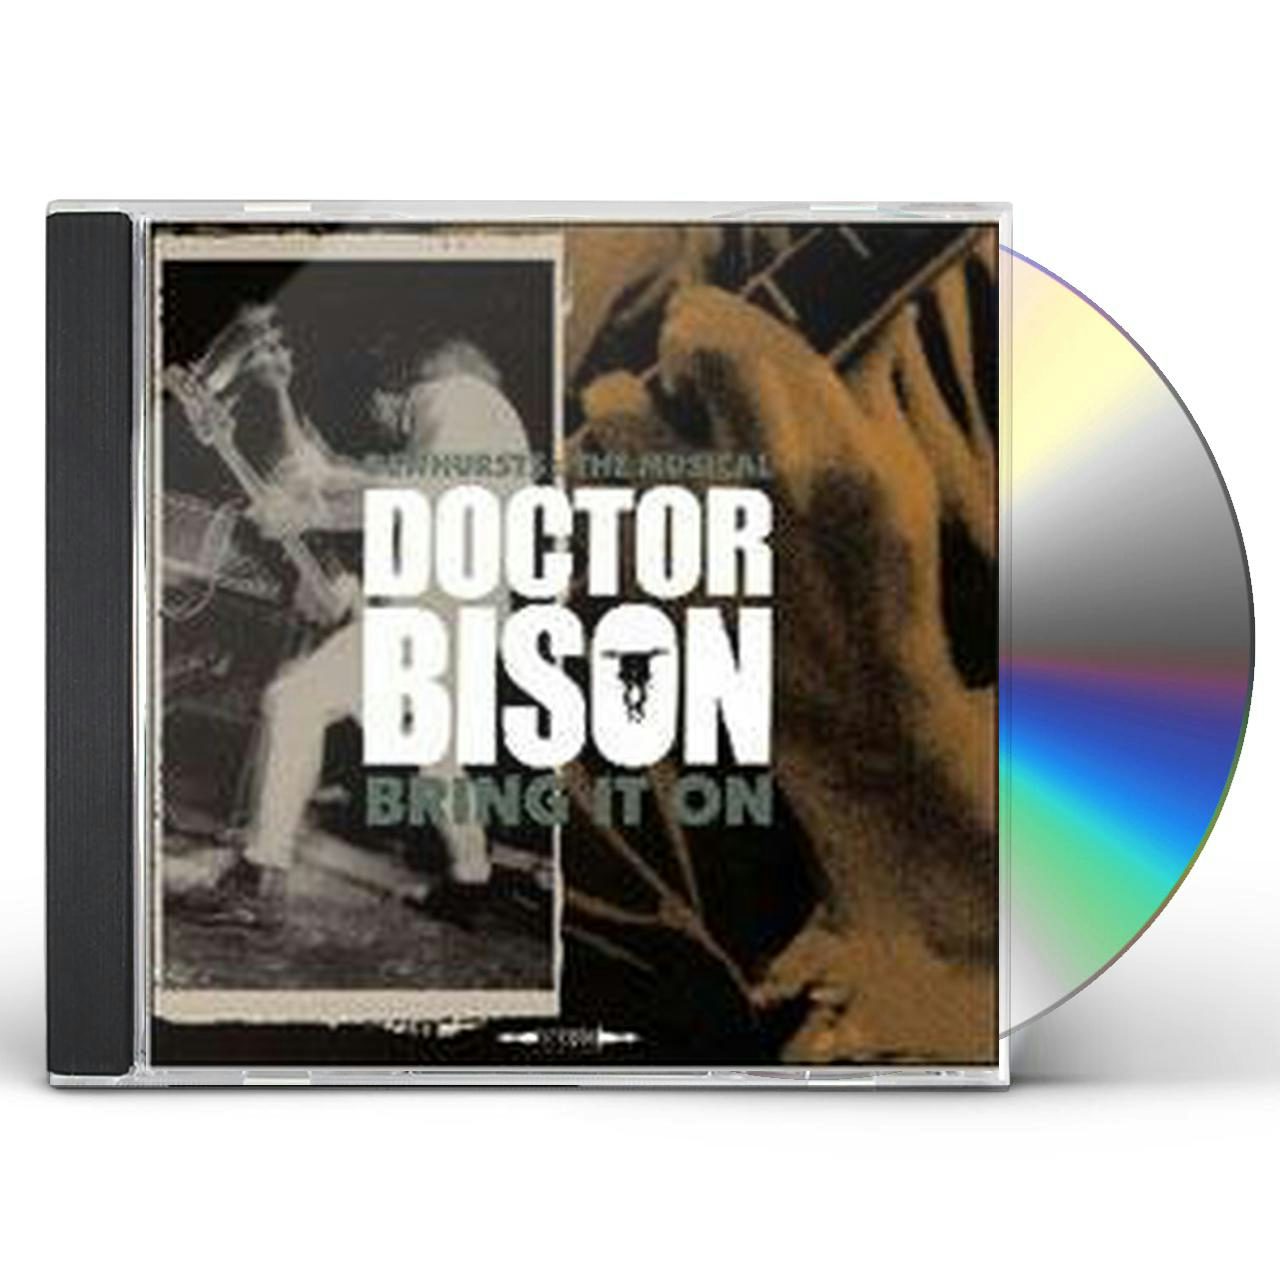 dewhurts: the musical / bring it on cd - Doctor Bison